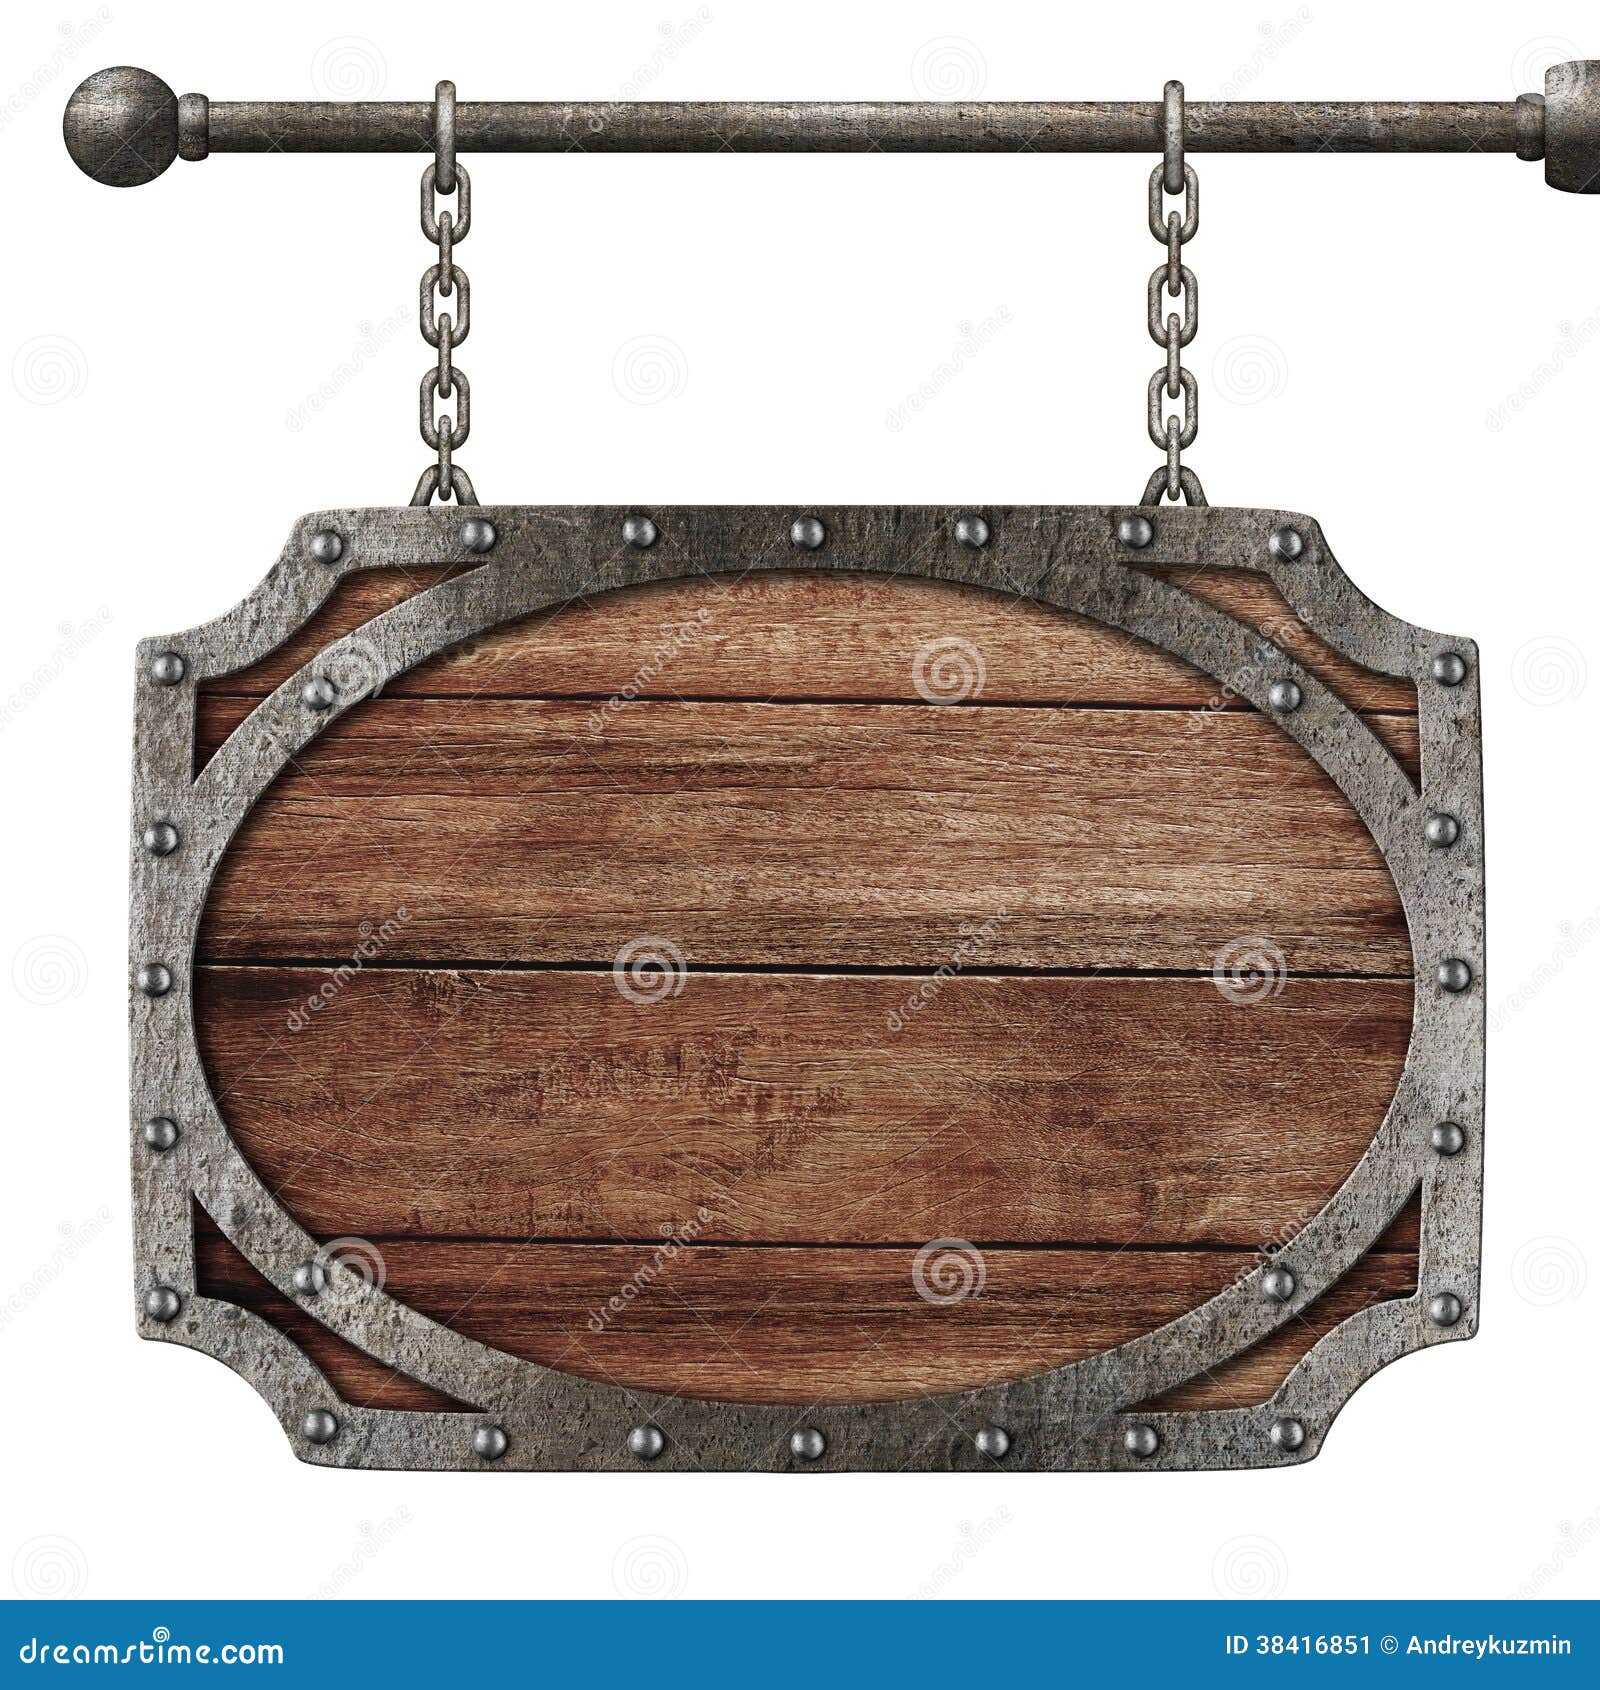 medieval wooden sign hanging on chains 